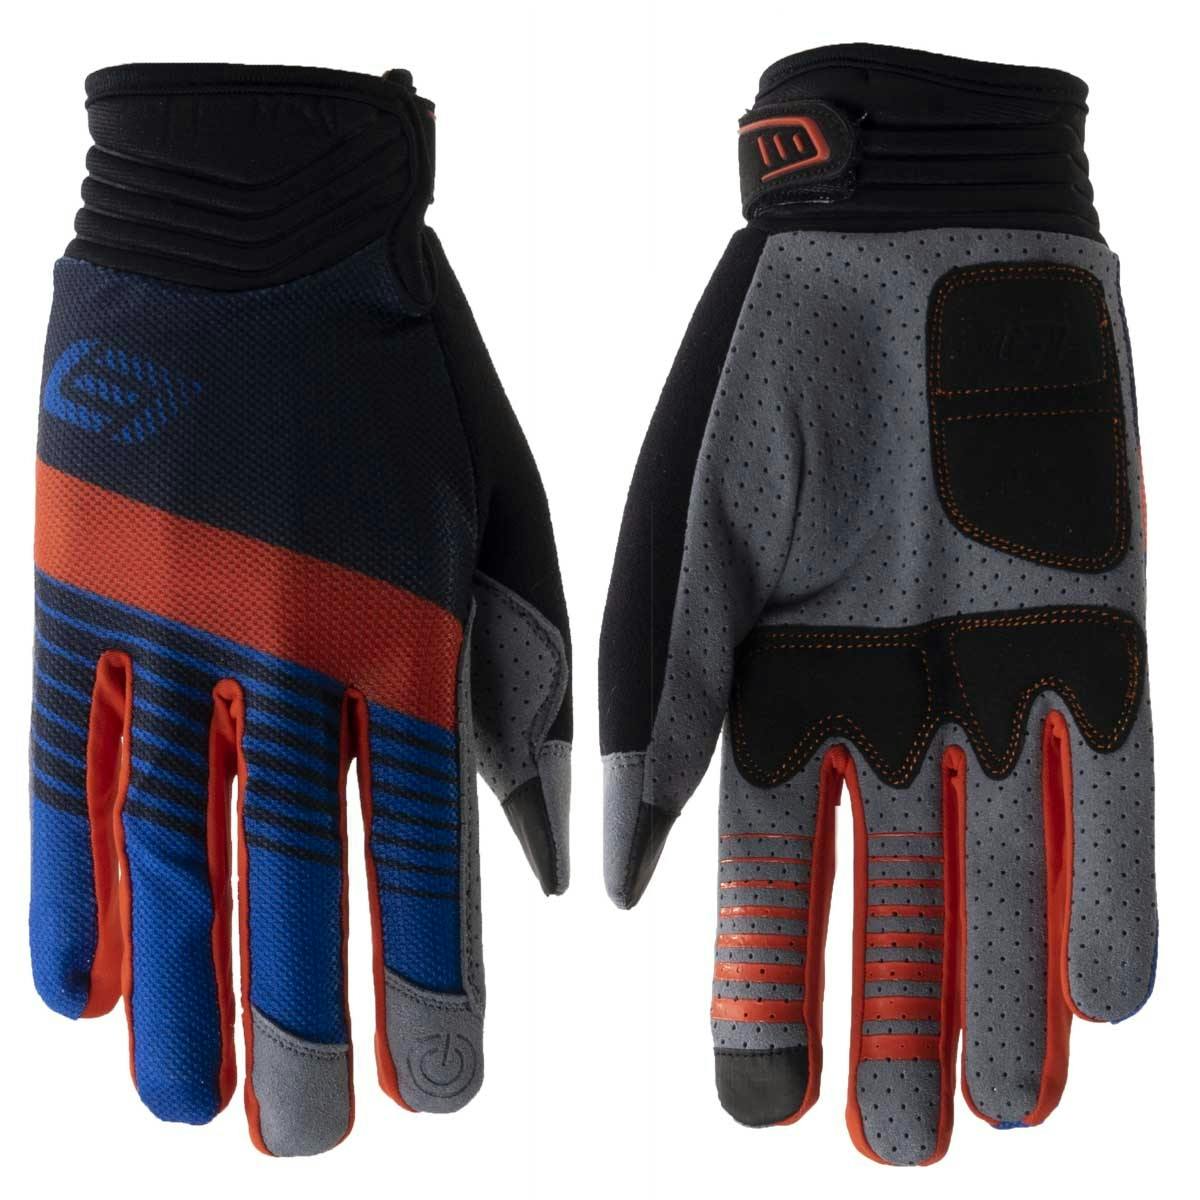 Bellwether Rock-it Gloves - Pacific - XS